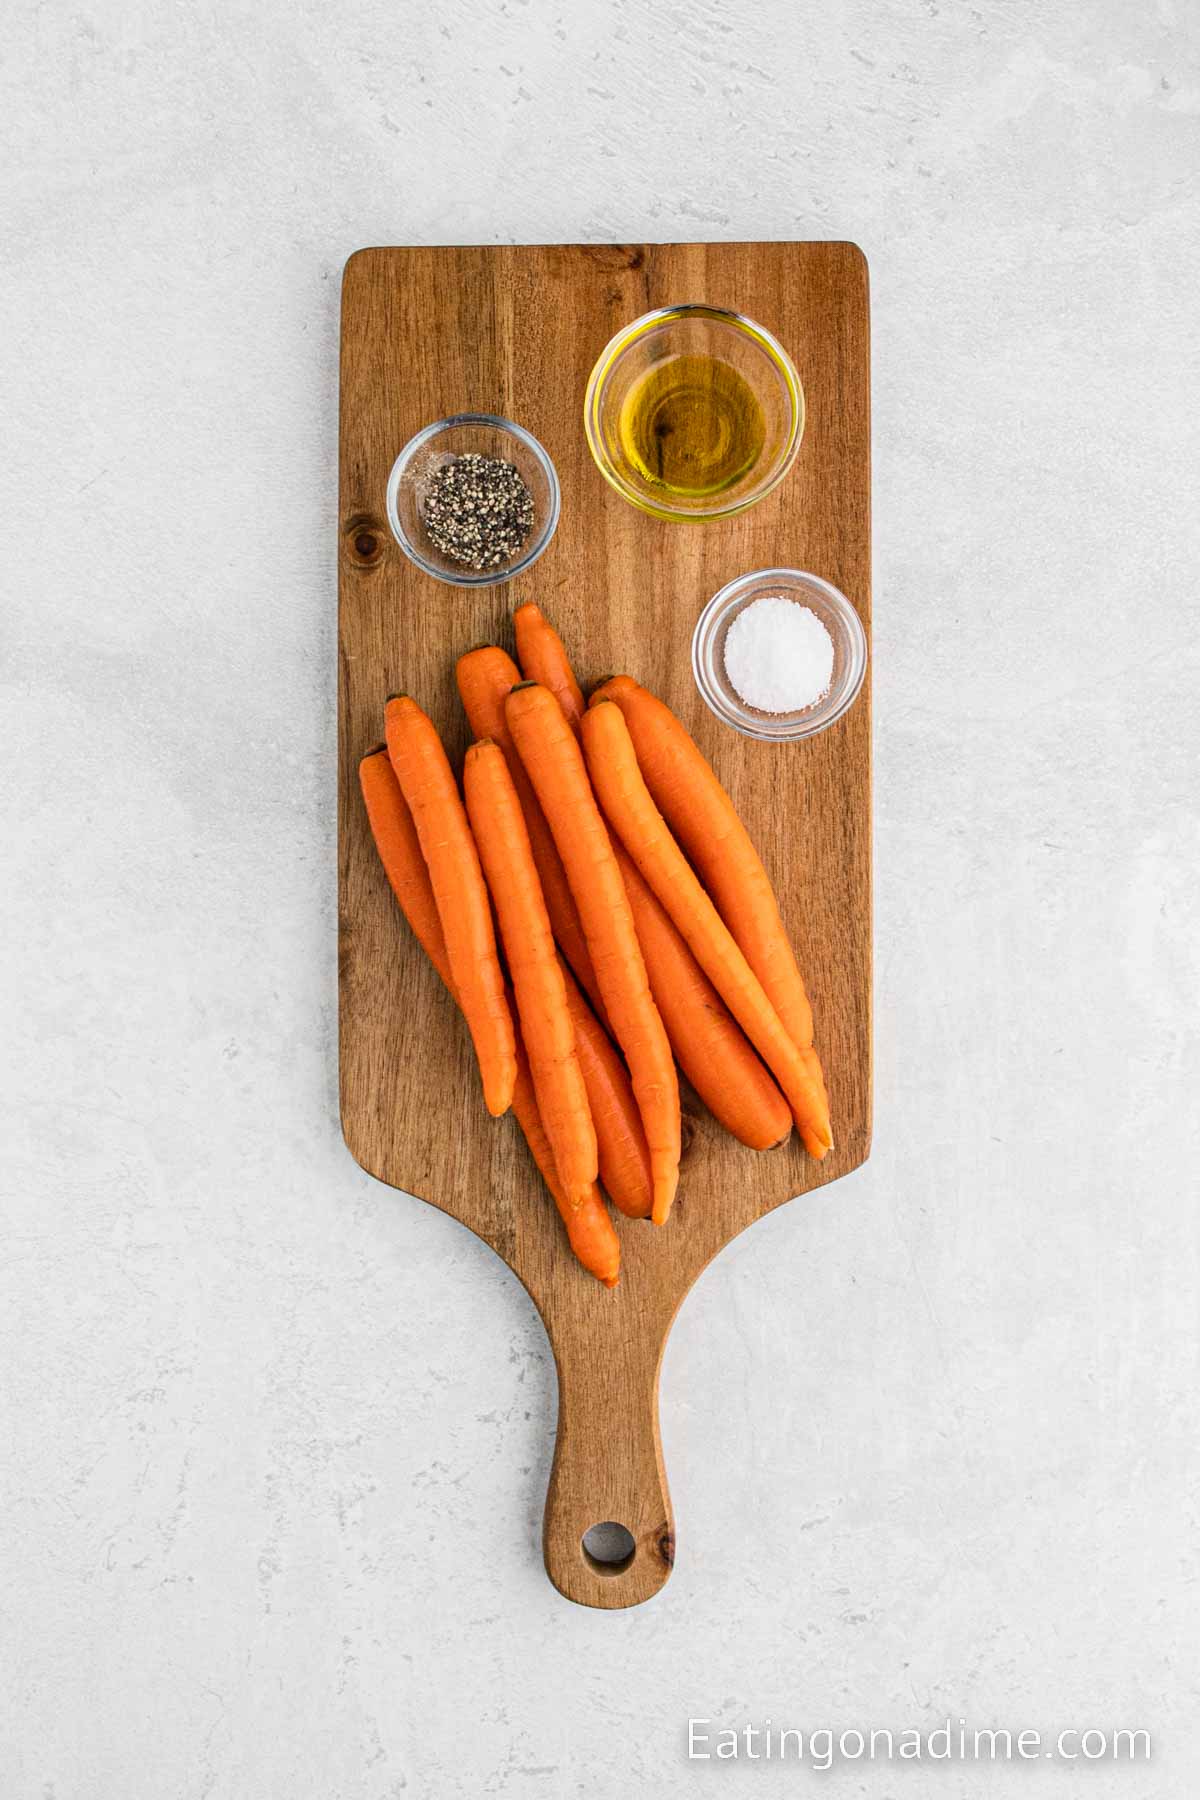 Baby Carrots, olive oil, salt and pepper